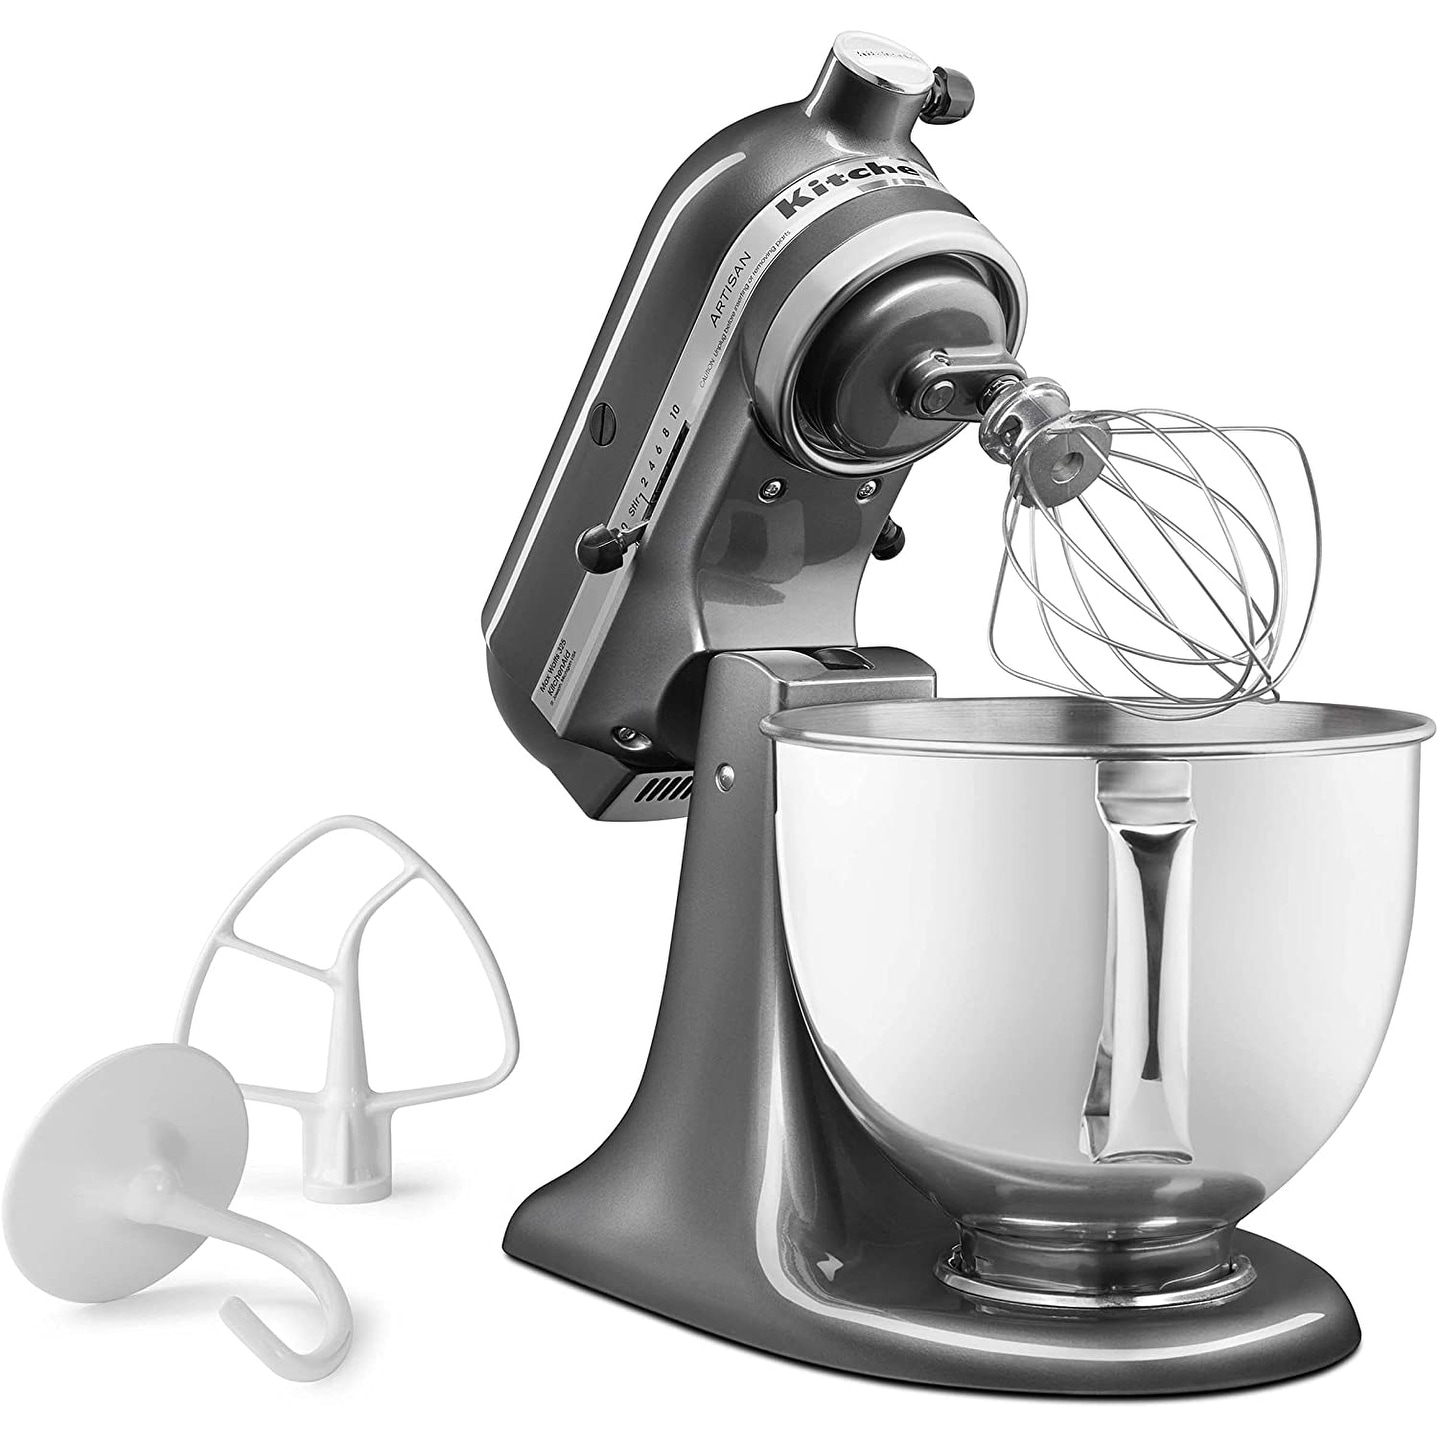 KitchenAid 4.5-quart Tilt-head Stand Mixer in Copper Pearl (As Is Item) -  Bed Bath & Beyond - 26036363